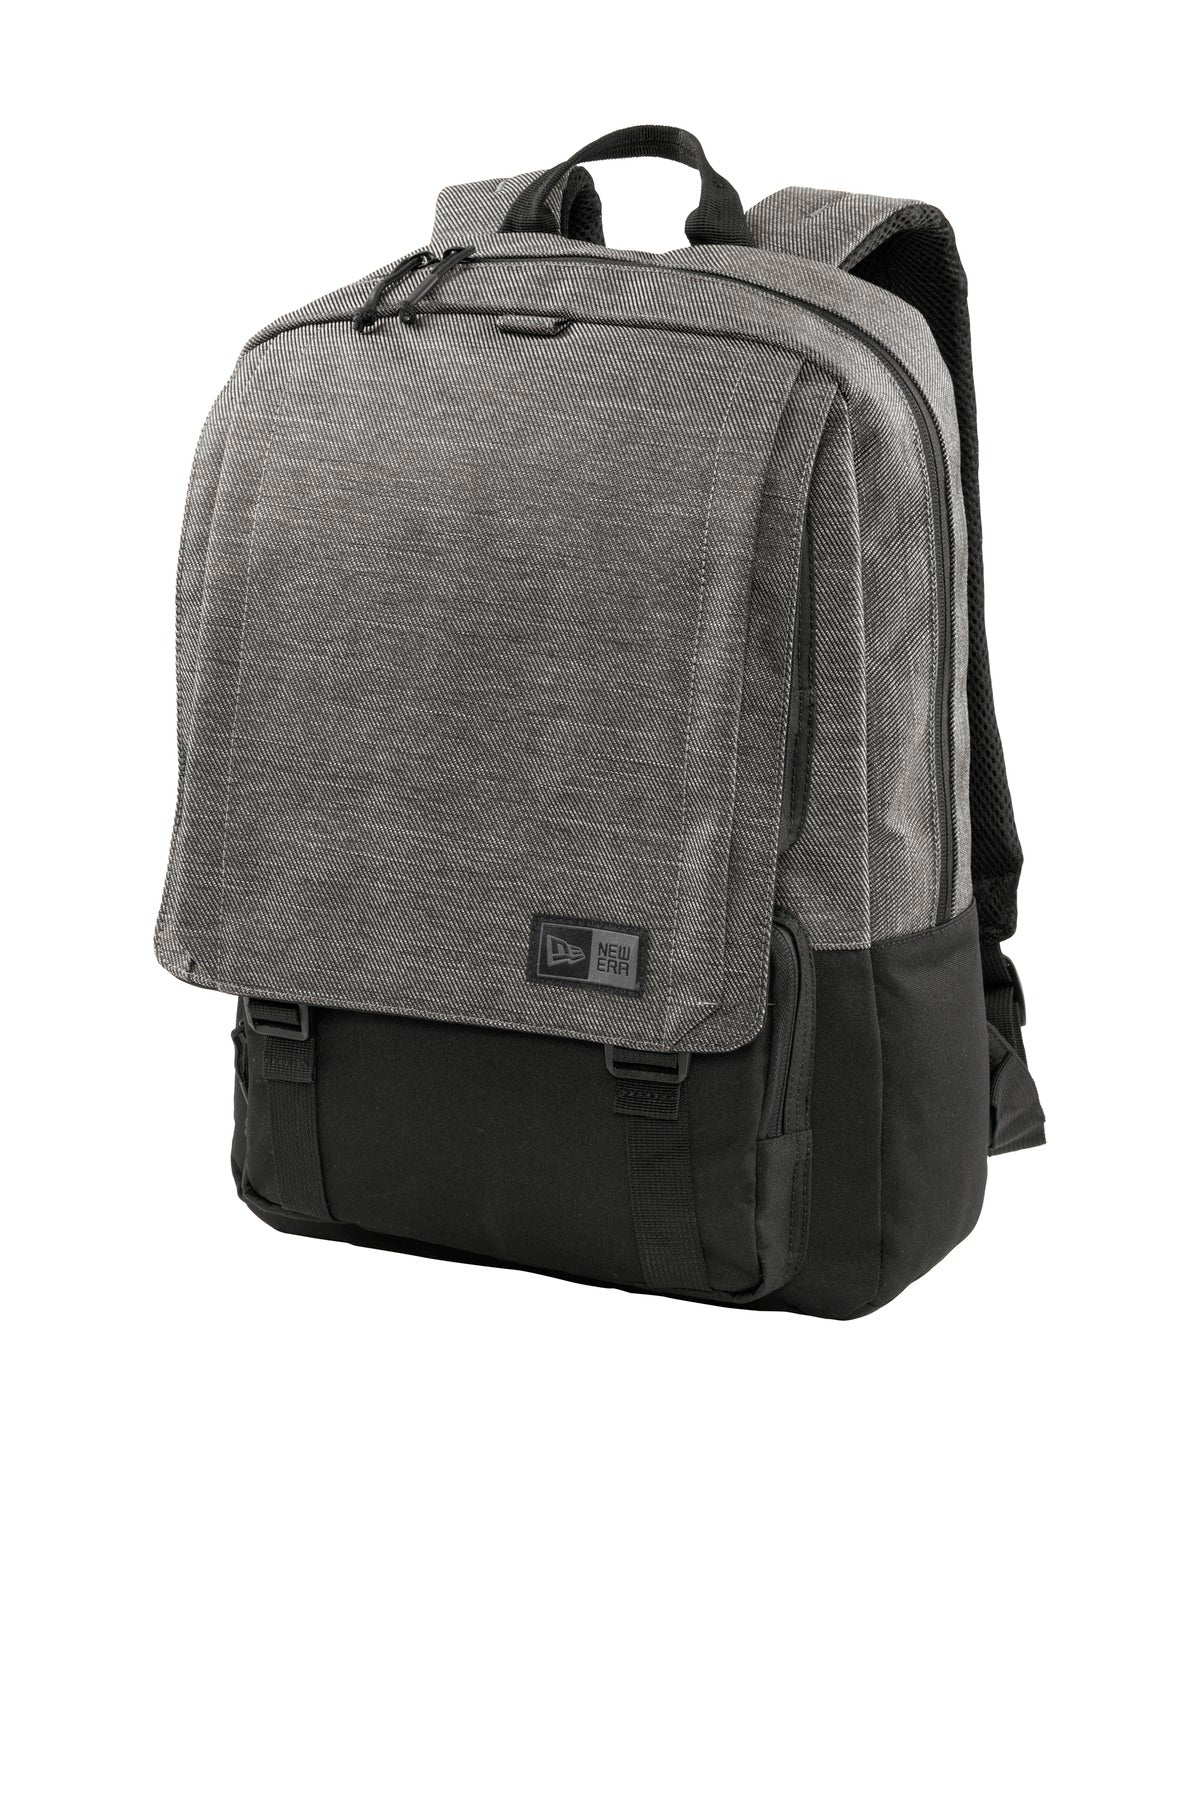 Shop the Legacy Backpack